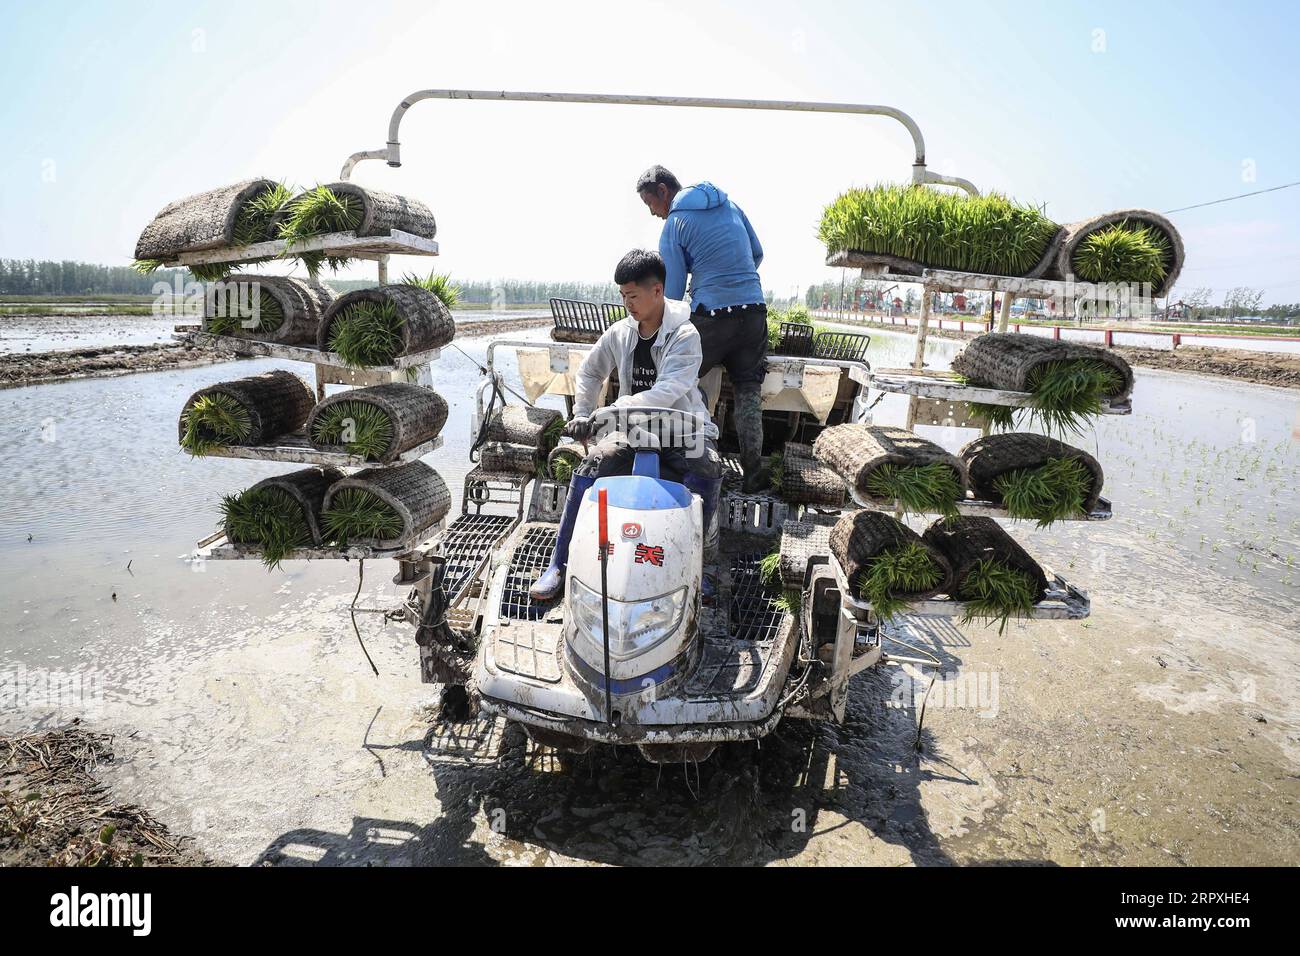 200524 -- PANJIN, May 24, 2020 -- Farmers operate a rice transplanter to plant rice seedlings in Dawa District in Panjin City, northeast China s Liaoning Province, May 24, 2020. Rice transplanting of over 1.59 million mu about 106,000 hectares paddy fields in Panjin, the main rice producing area in Liaoning, has started recently.  CHINA-LIAONING-RICE-TRANSPLANTING CN PanxYulong PUBLICATIONxNOTxINxCHN Stock Photo